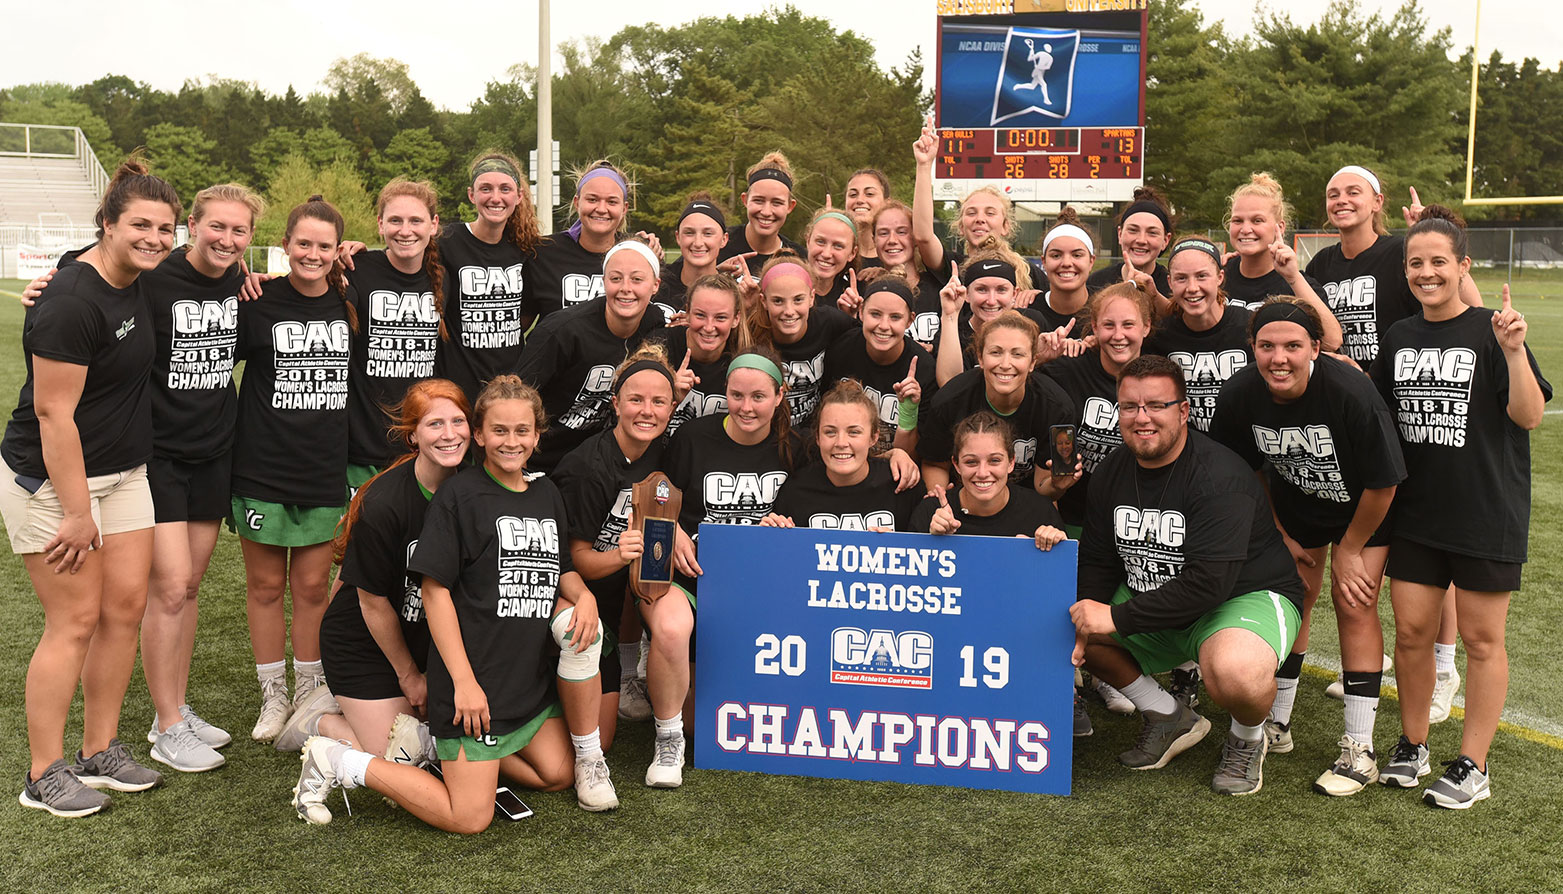 York Wins First Ever CAC Women's Lacrosse Championship with 13-11 Victory Over Salisbury